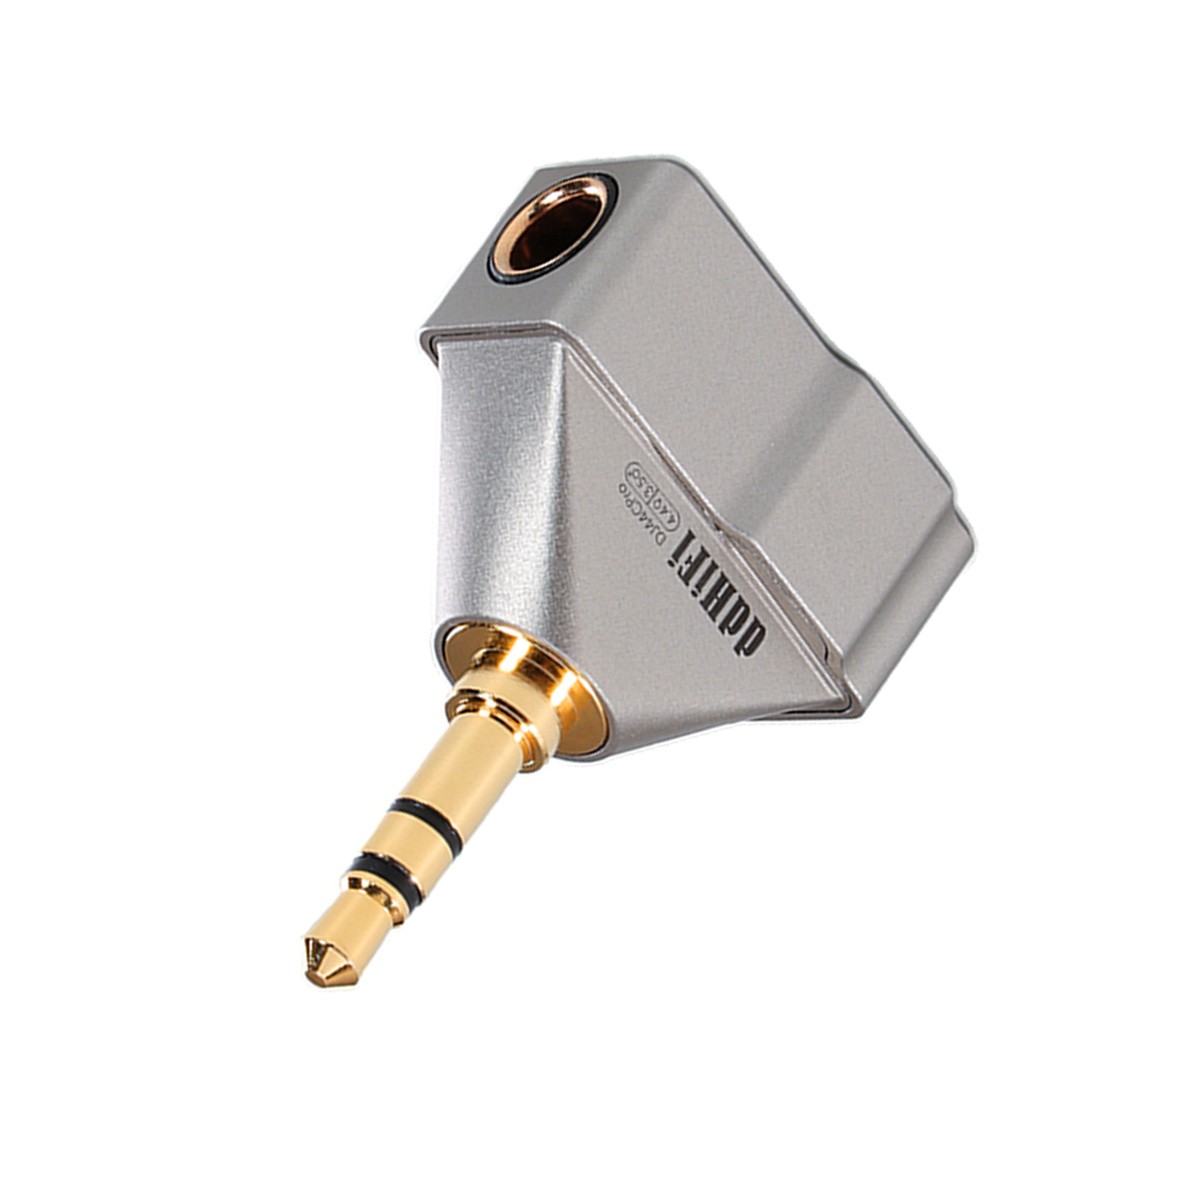 DD DJ44C PRO Female Balanced Jack 4.4mm to Male Single-Ended Jack 3.5mm Adapter Gold Plated